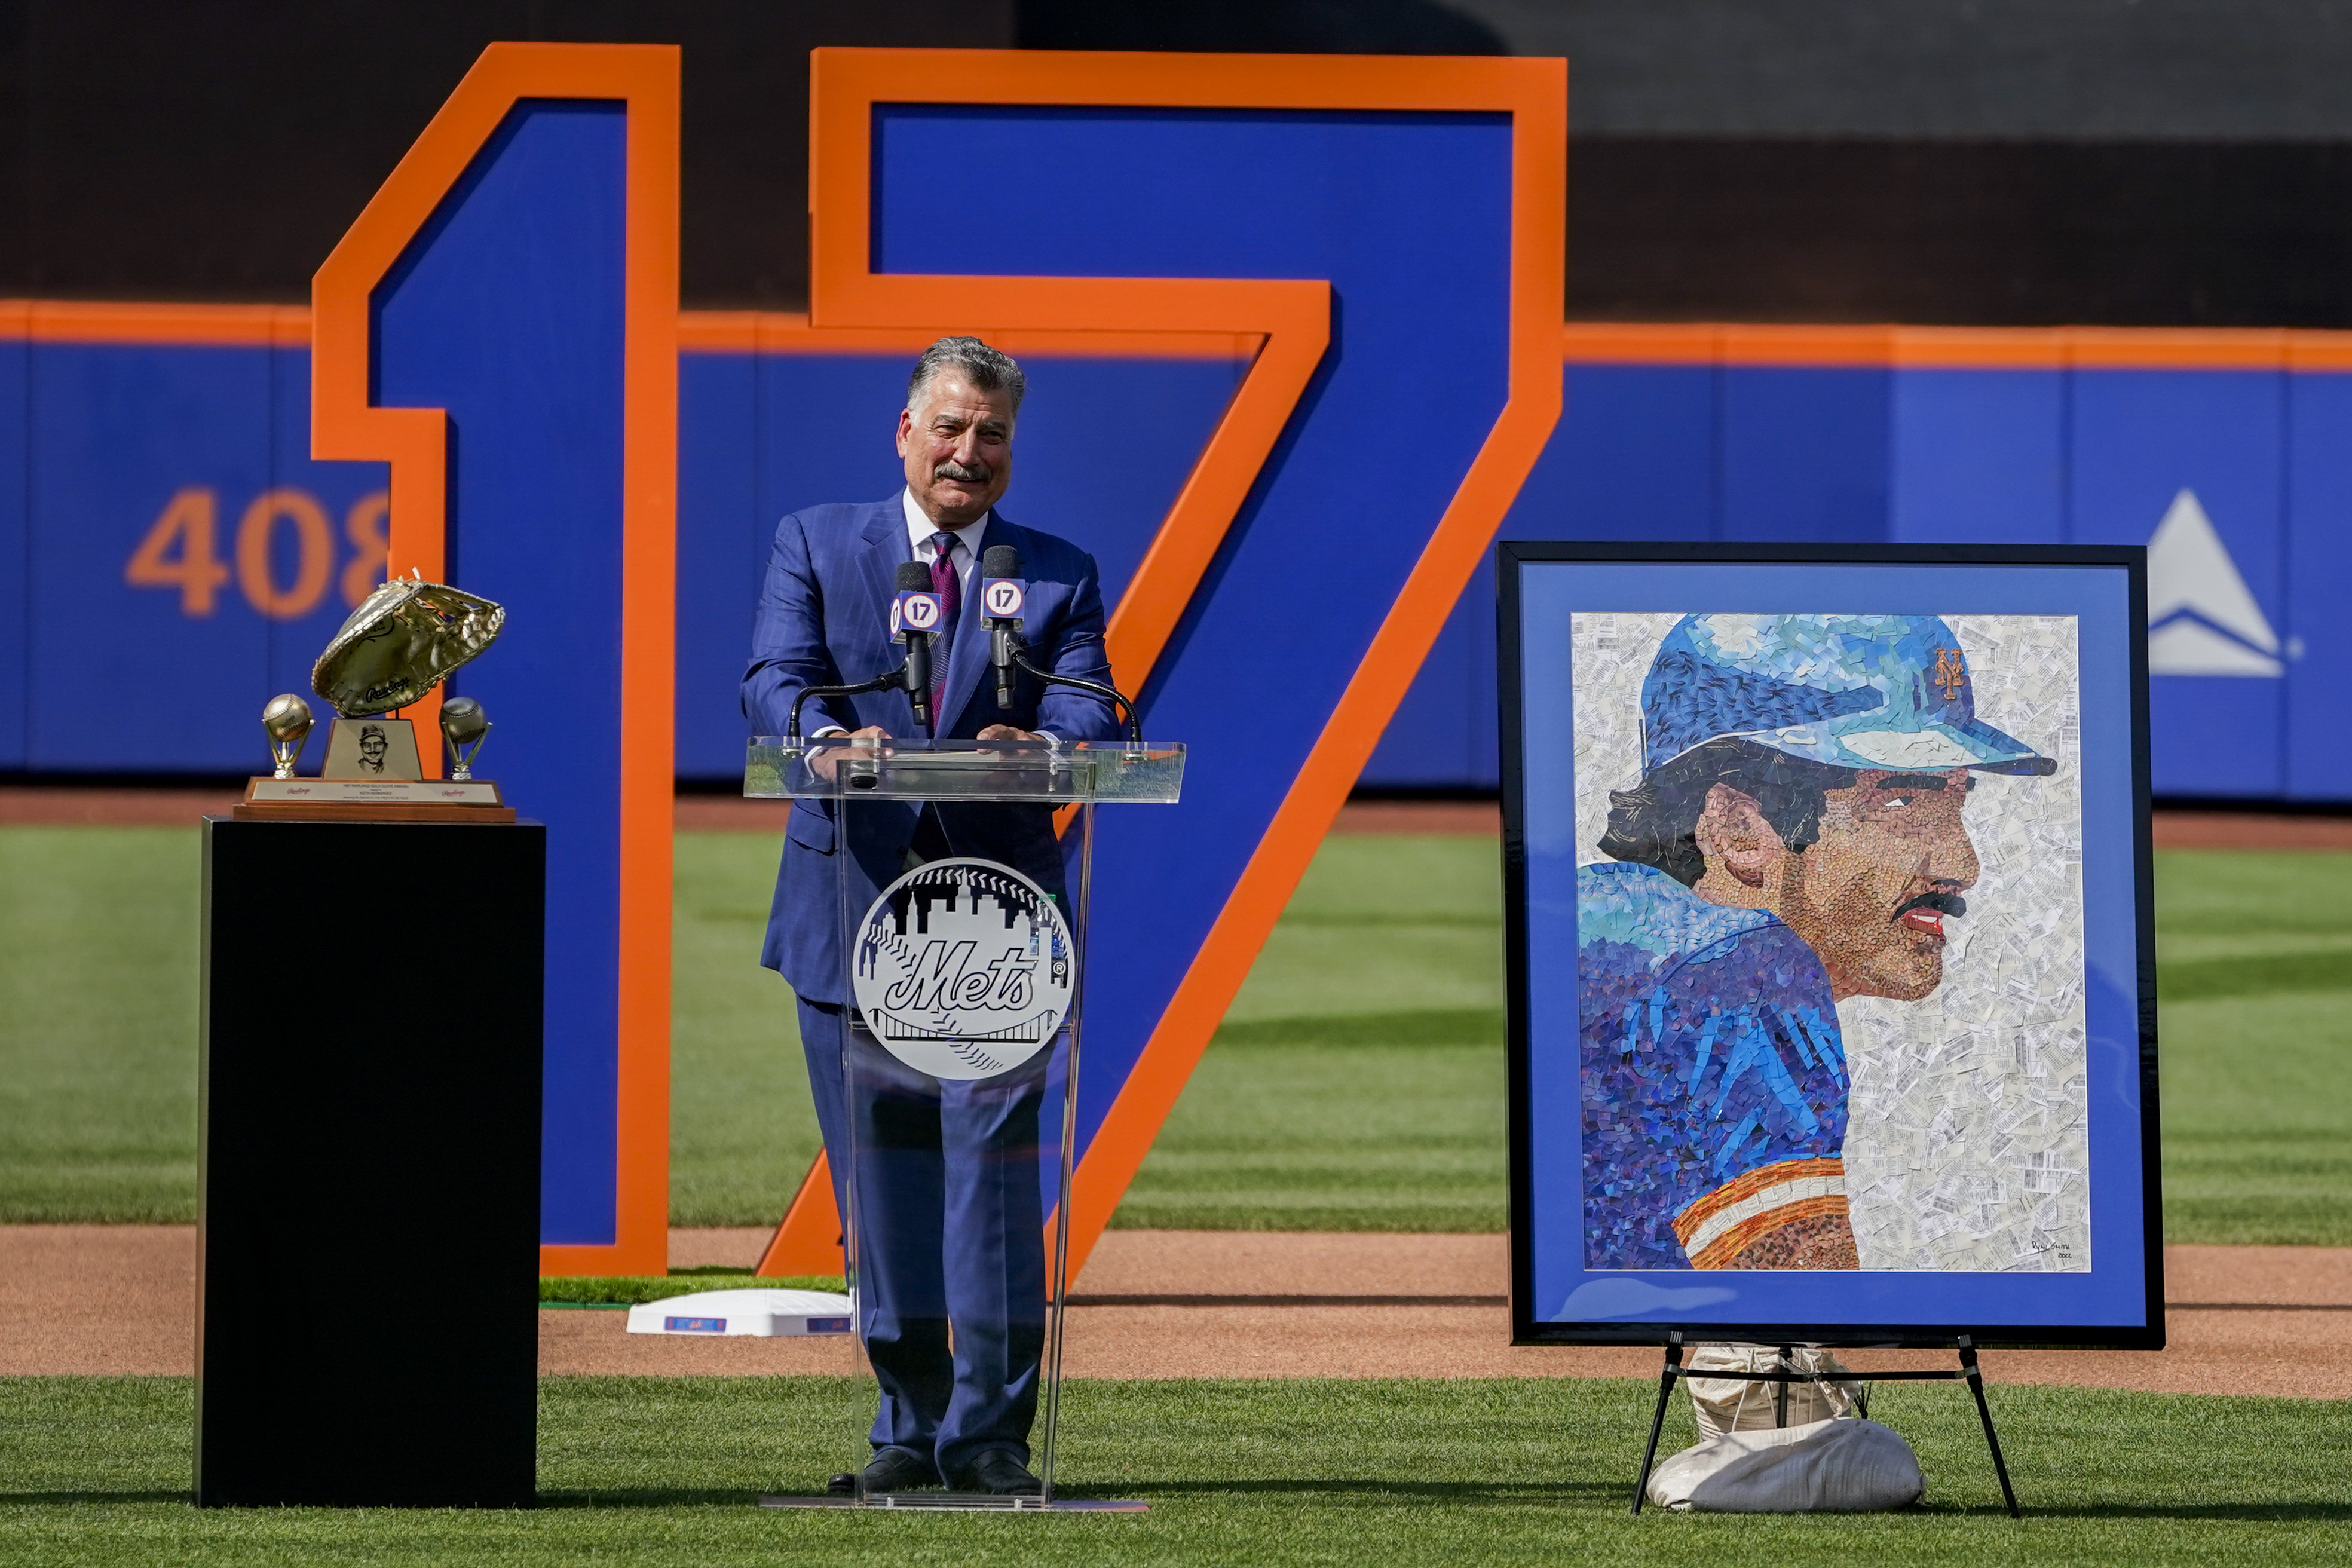 Updates & Support to help Keith Hernandez Beat Cancer